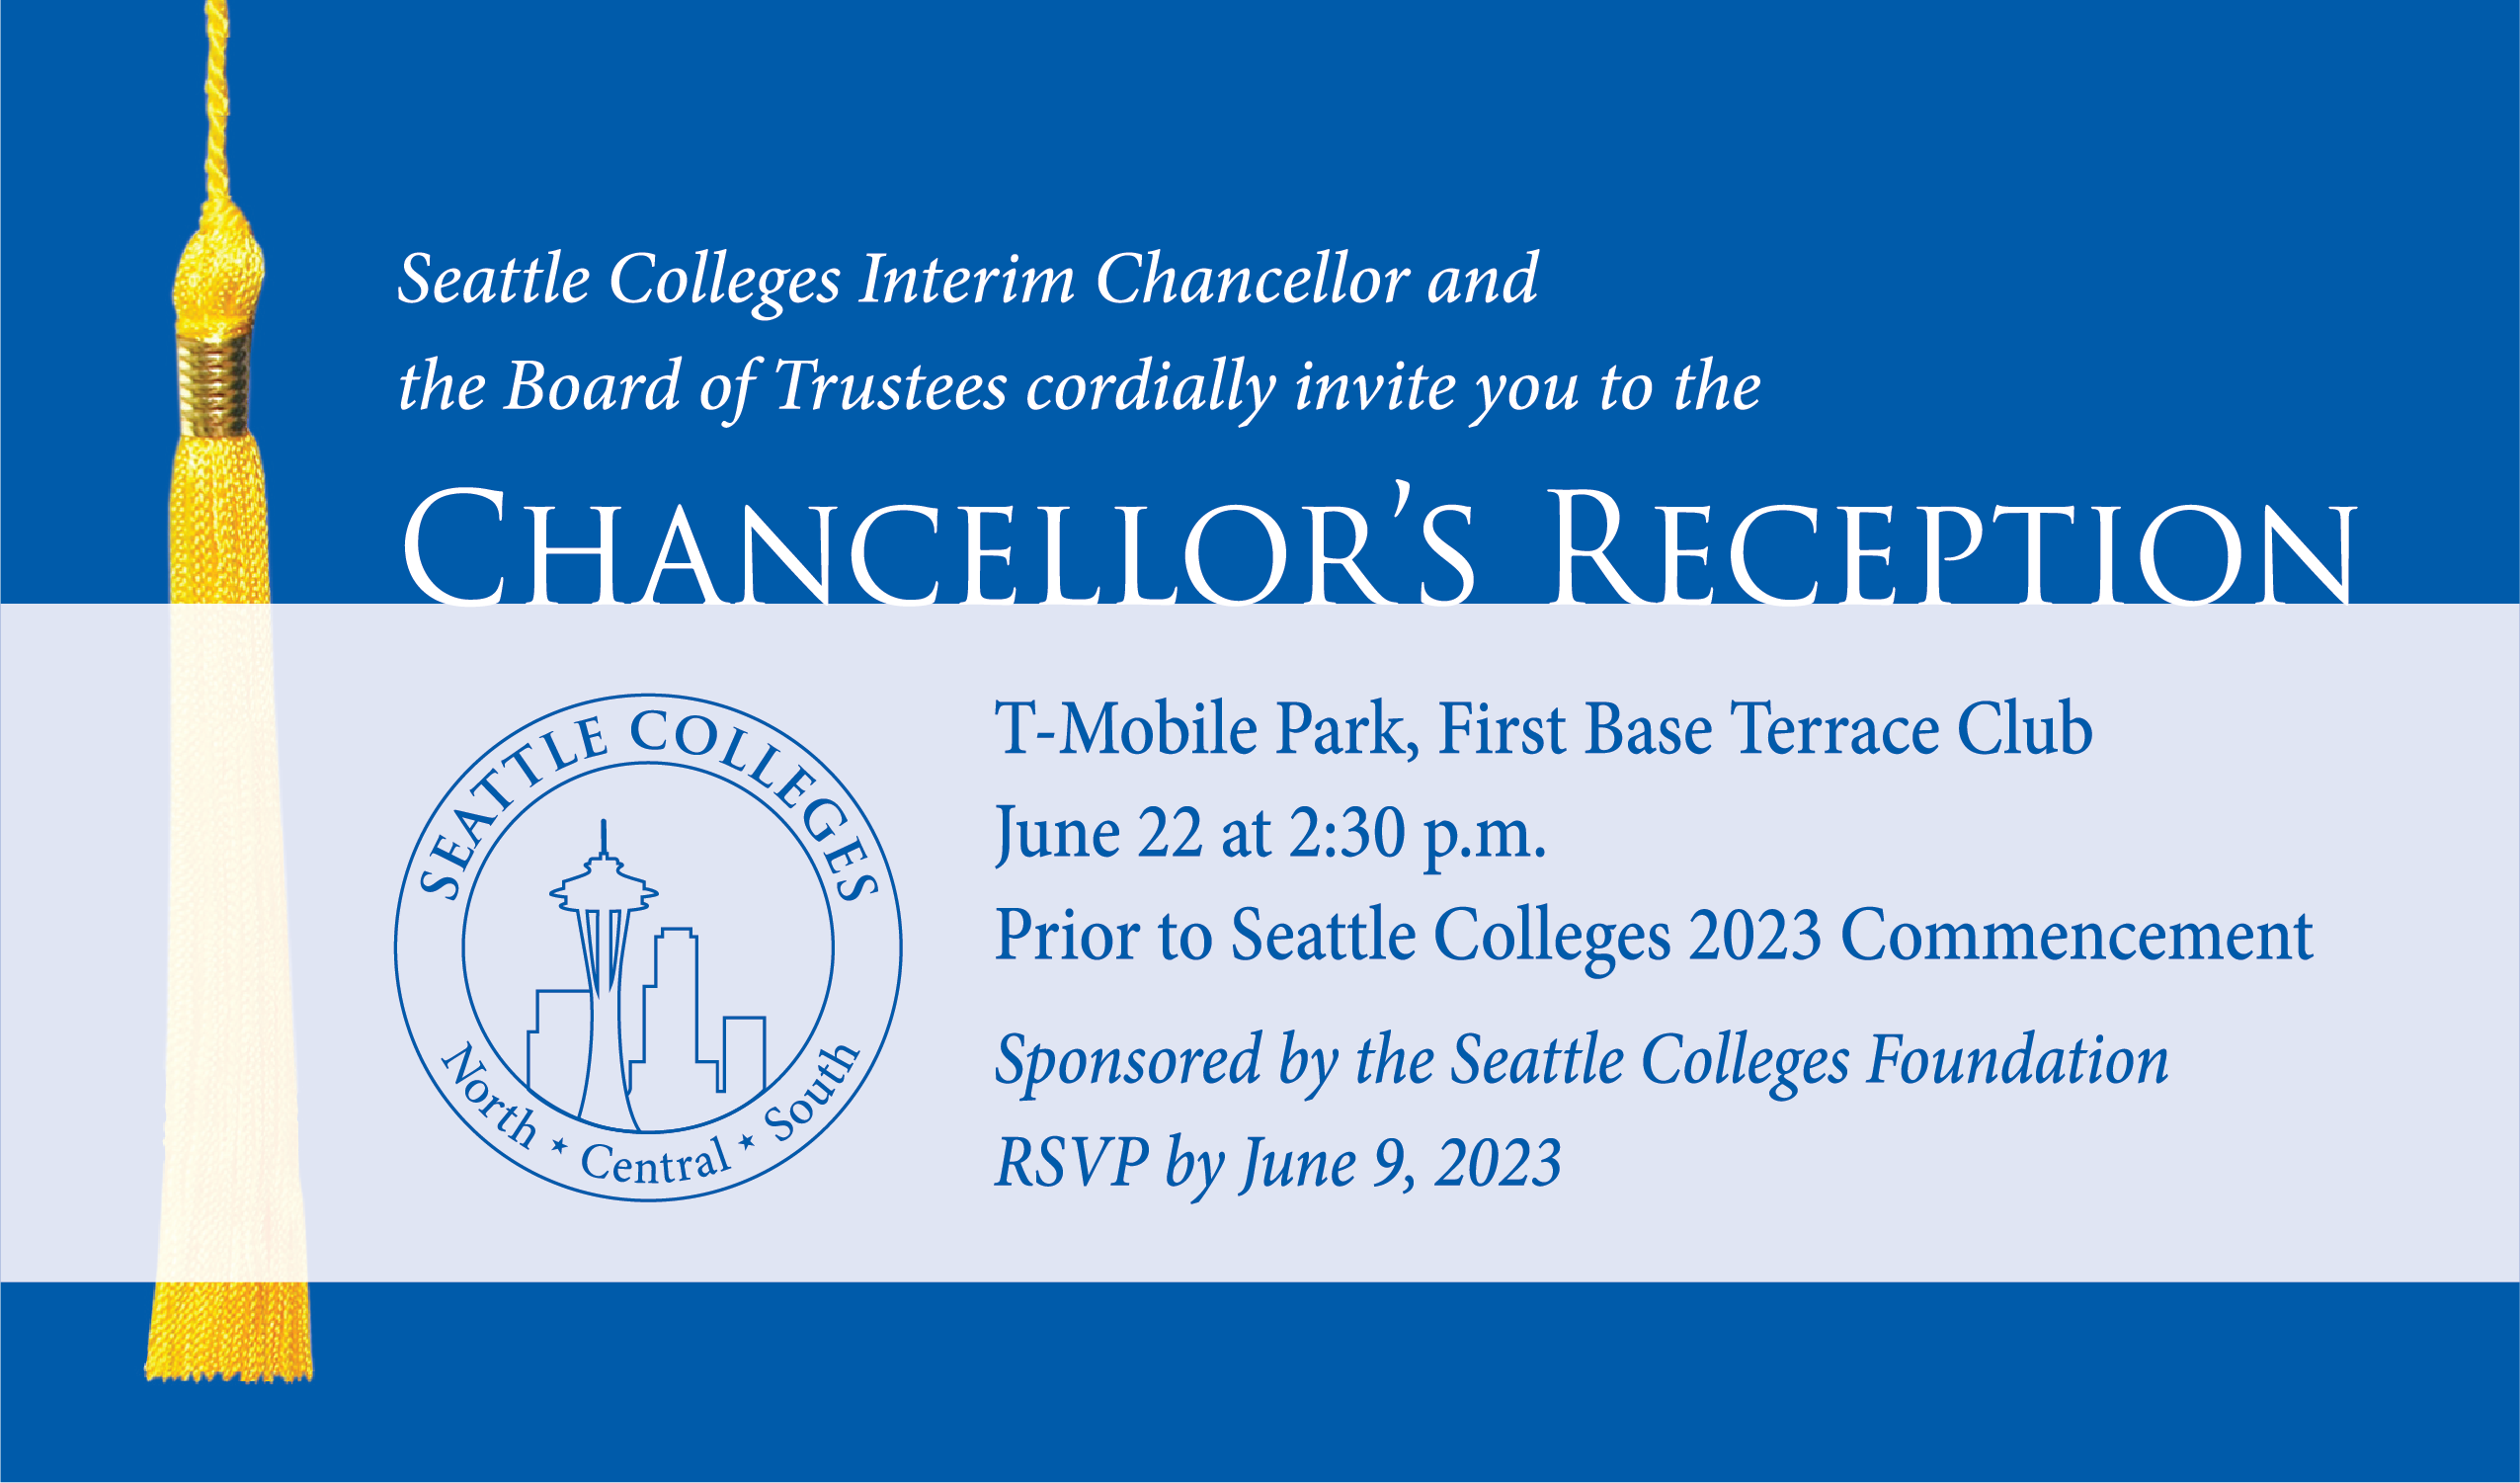 Chancellor's Reception with images of Seattle Colleges logo and a scholar's cap and tassel